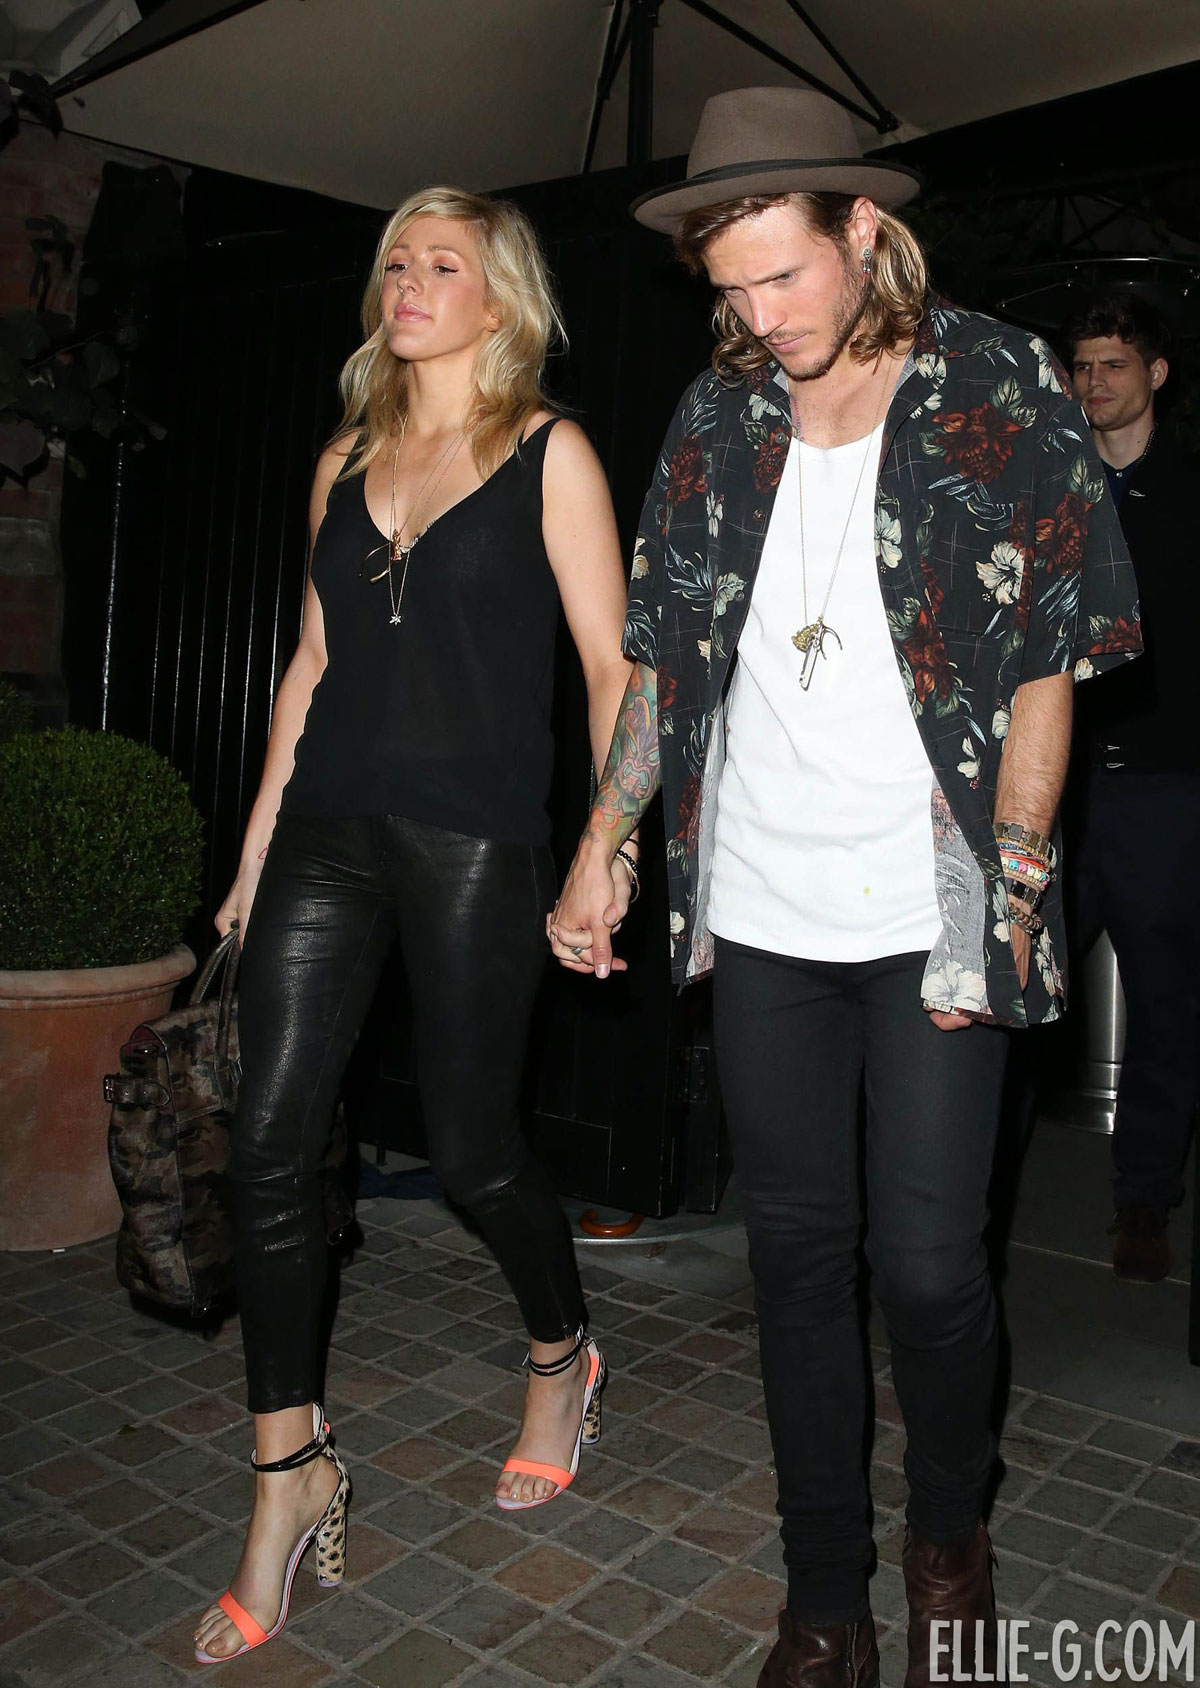 Ellie Goulding was spotted at the Chiltern Firehouse in London